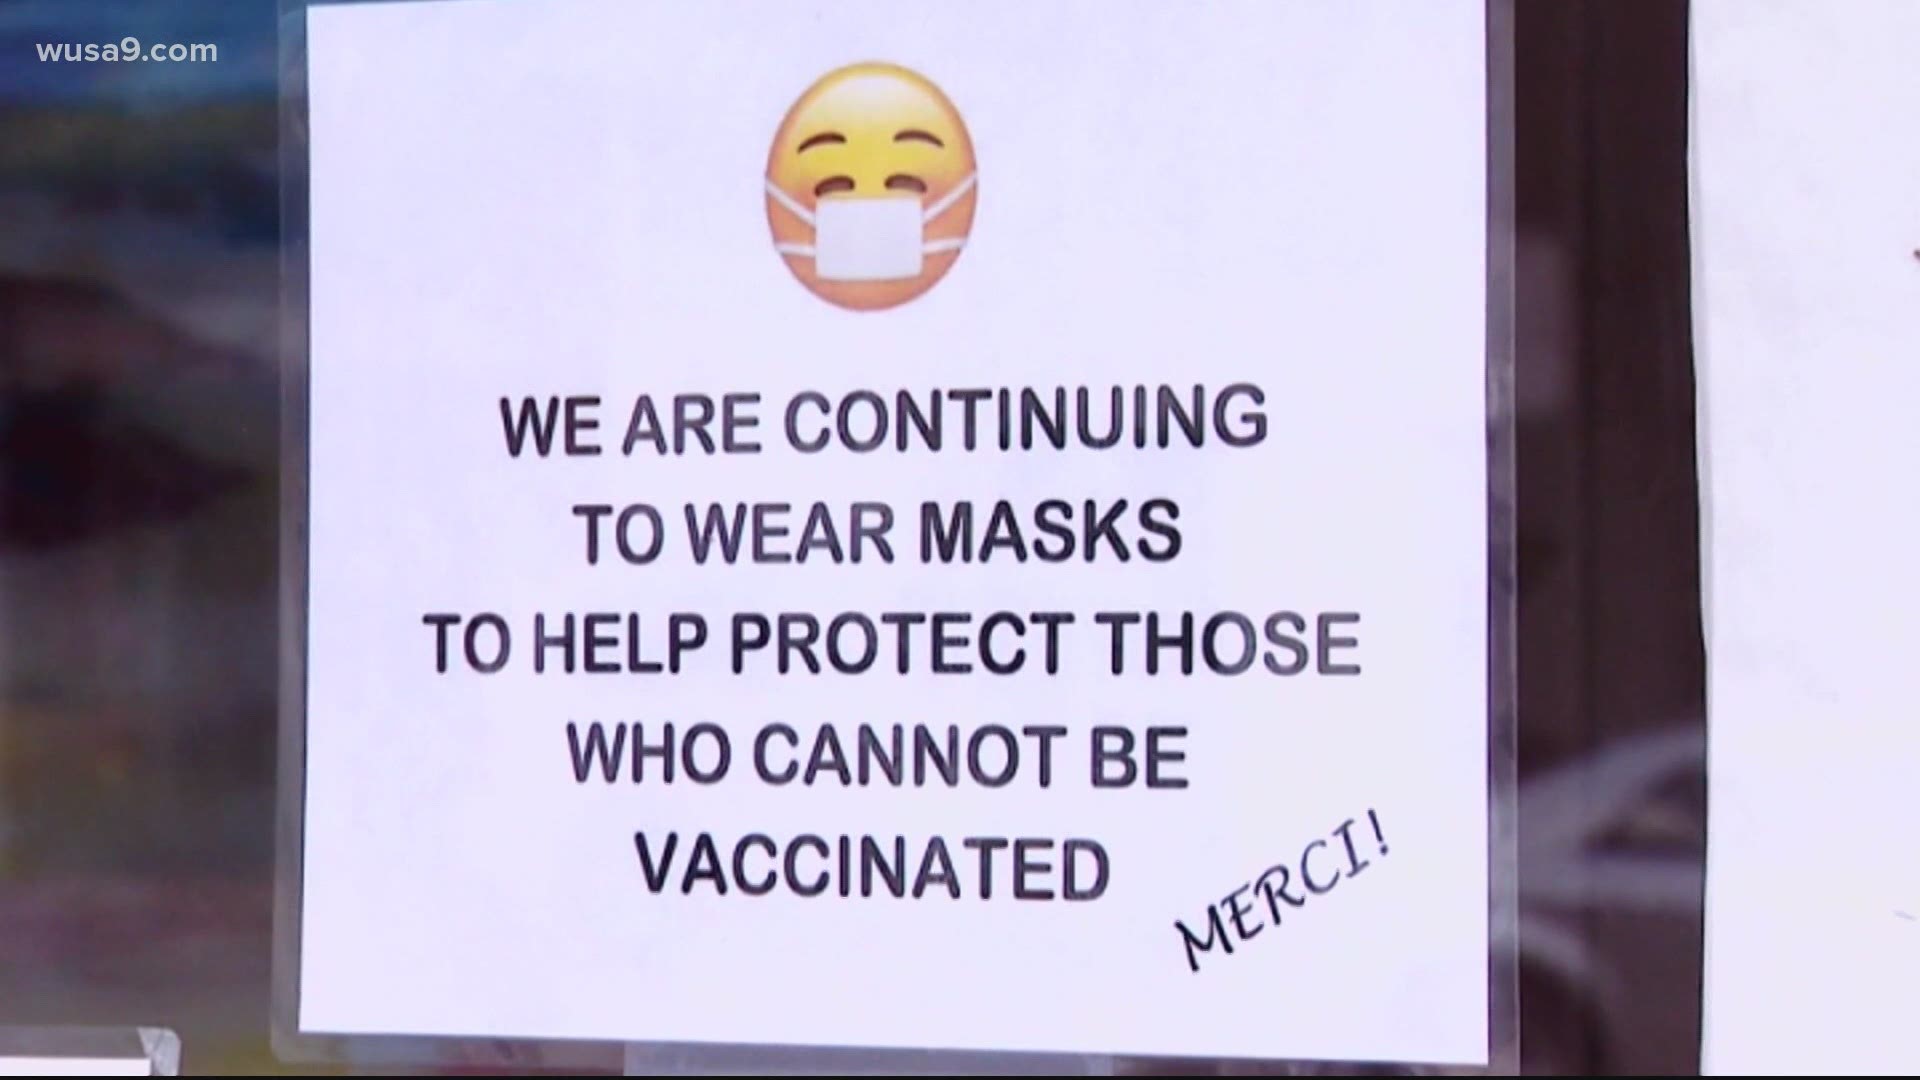 On Tuesday, Alexandria city leaders urged residents to wear masks in public indoor settings due to rising COVID-19 metrics.